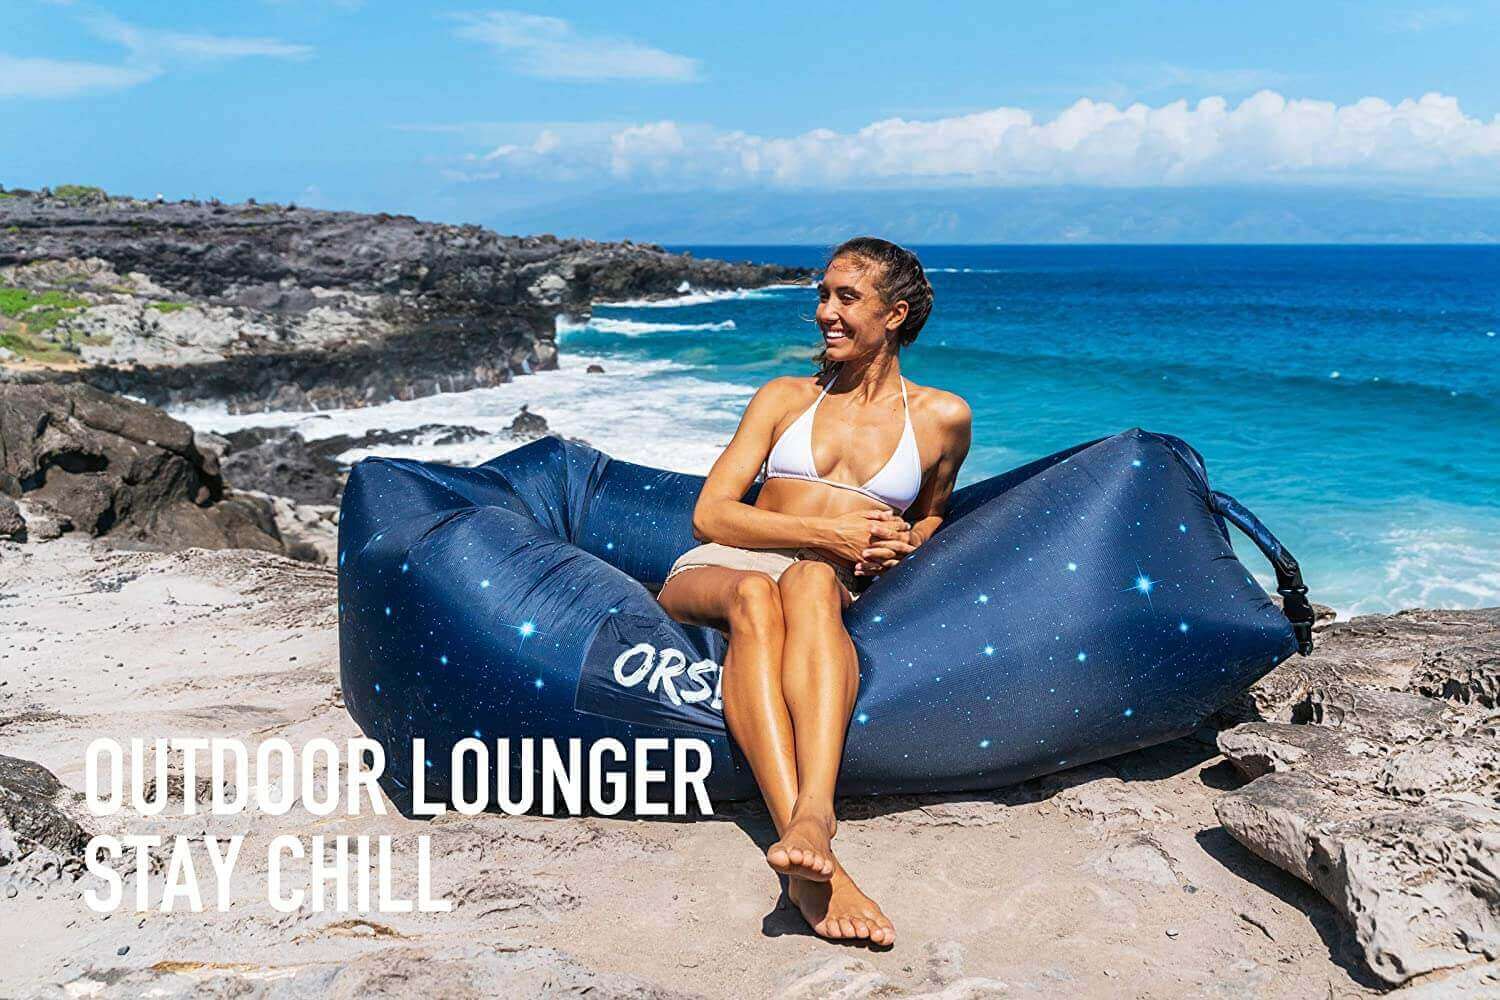 Orsen Inflatable Lounger Air Sofa, Air Couch Airbag Chair Camping Hiking Beach Outdoor